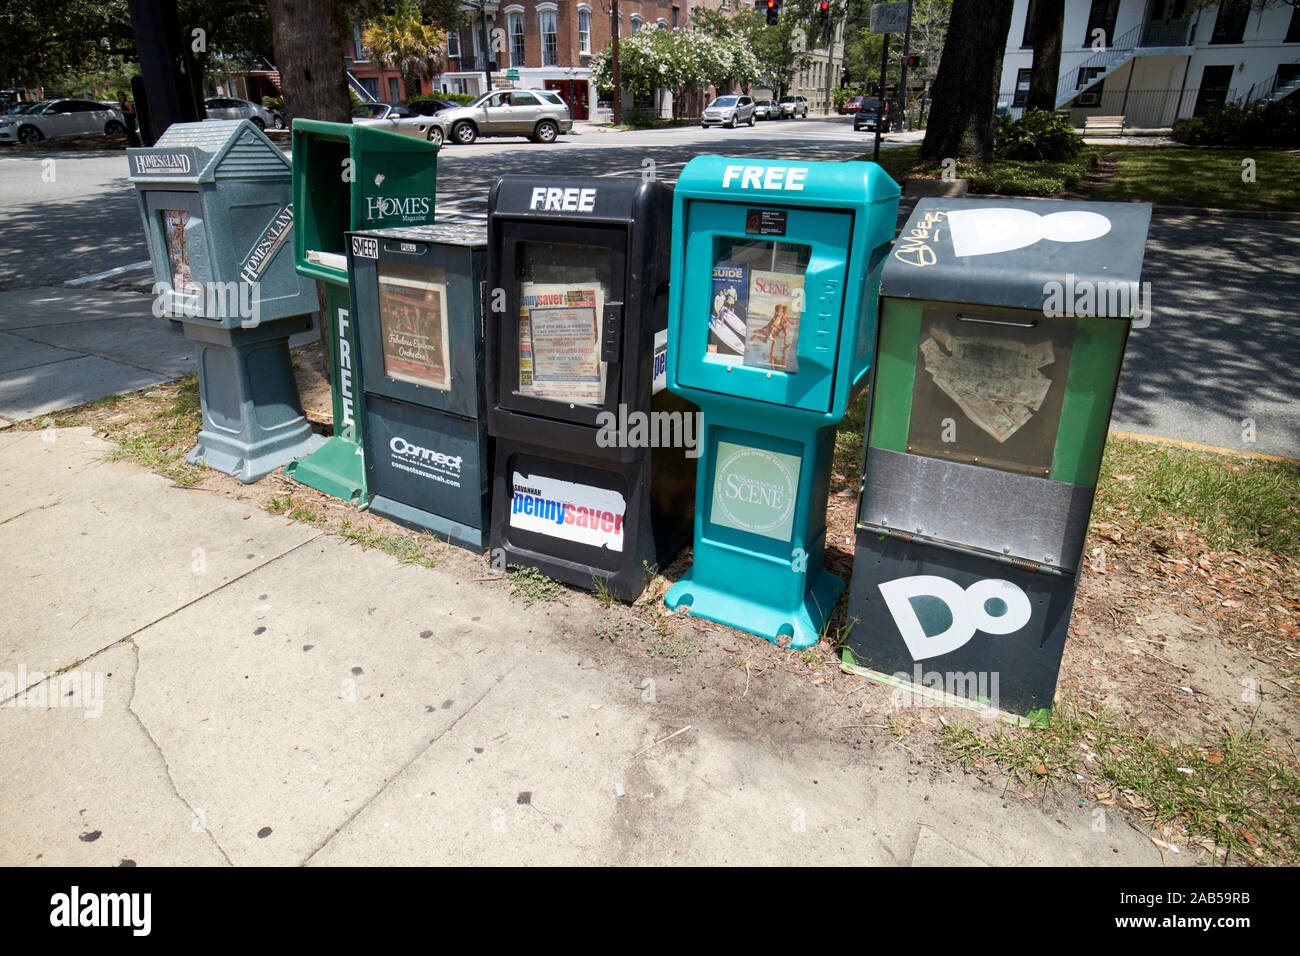 free papers dispensers on street in historic district of savannah georgia usa Stock Photo